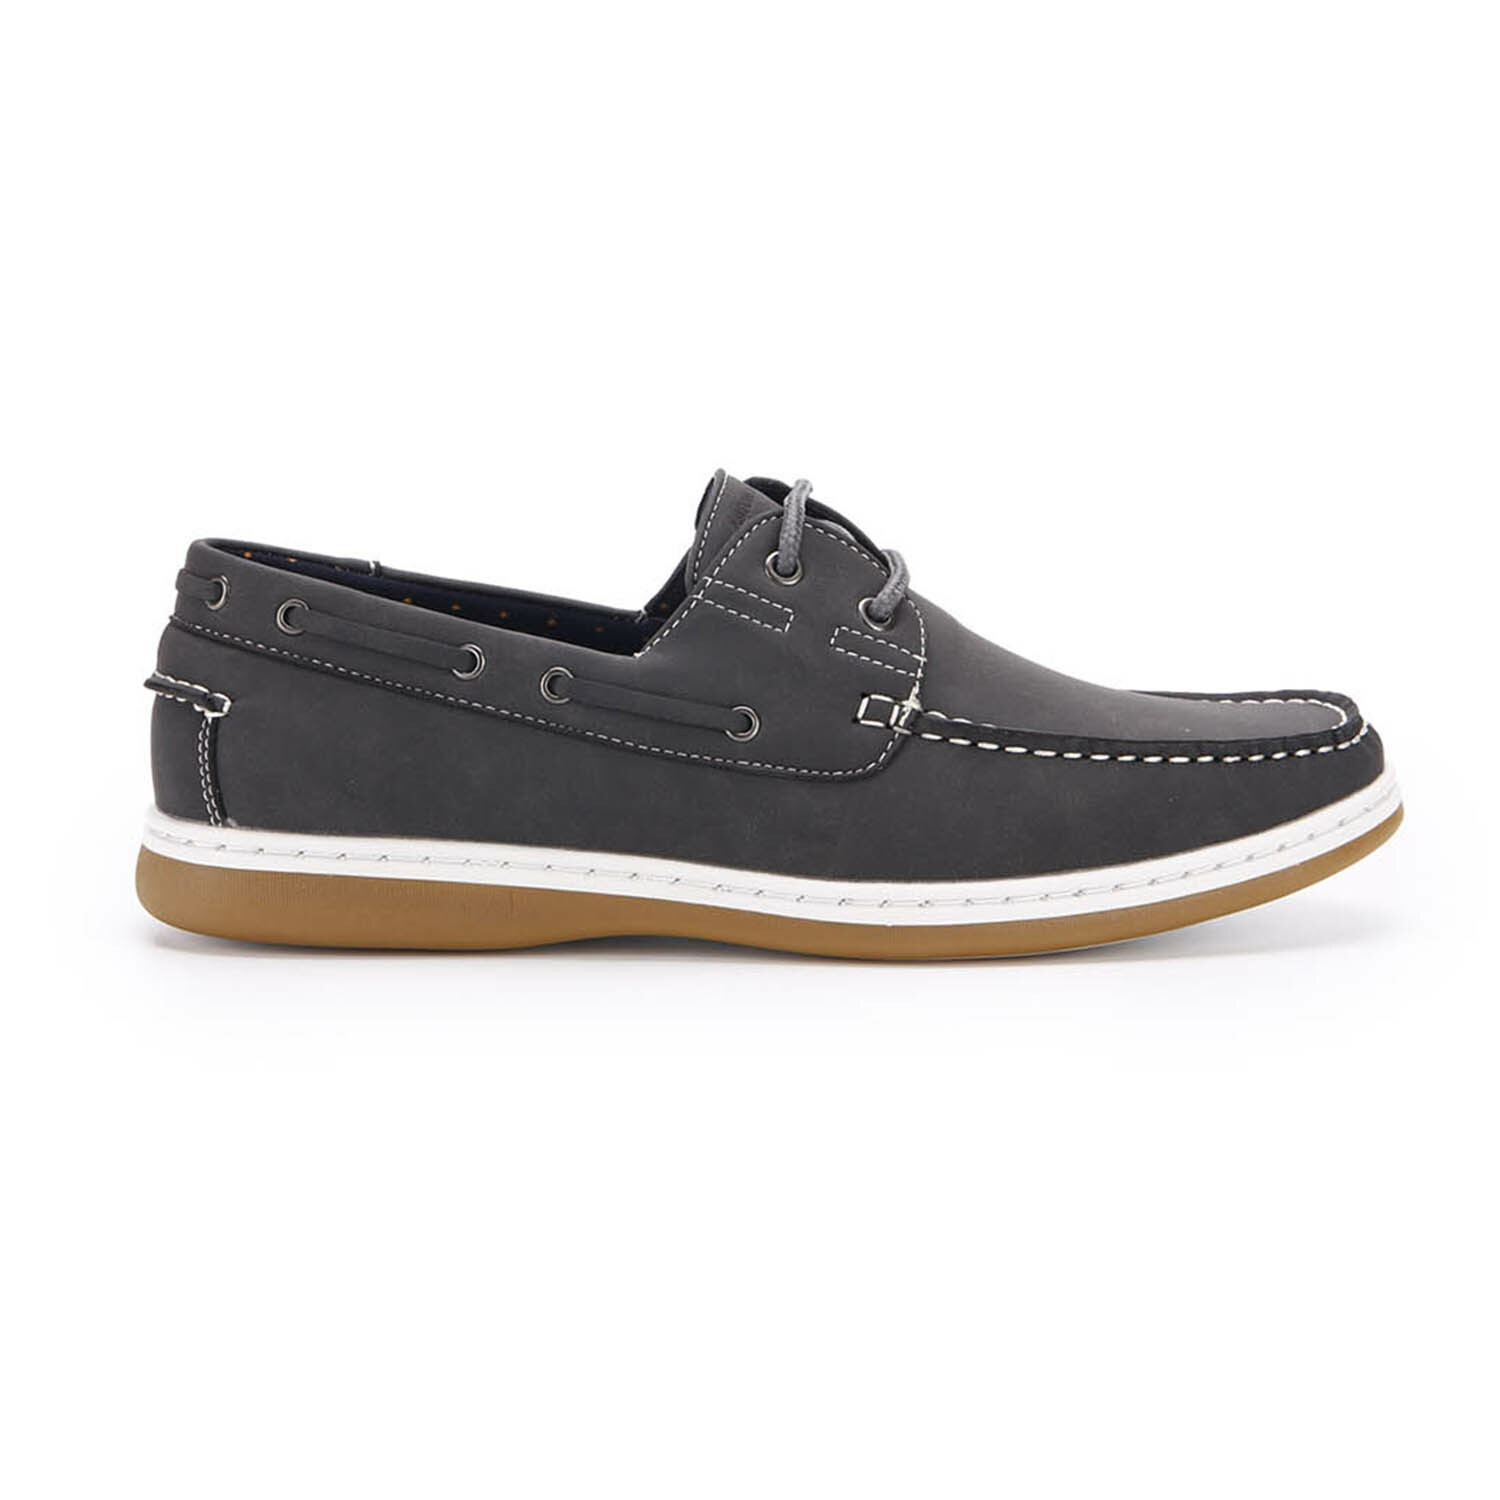 Sail Lace-Up Boat Shoes // Gray (8 M) - Aston Marc Shoes - Touch of Modern